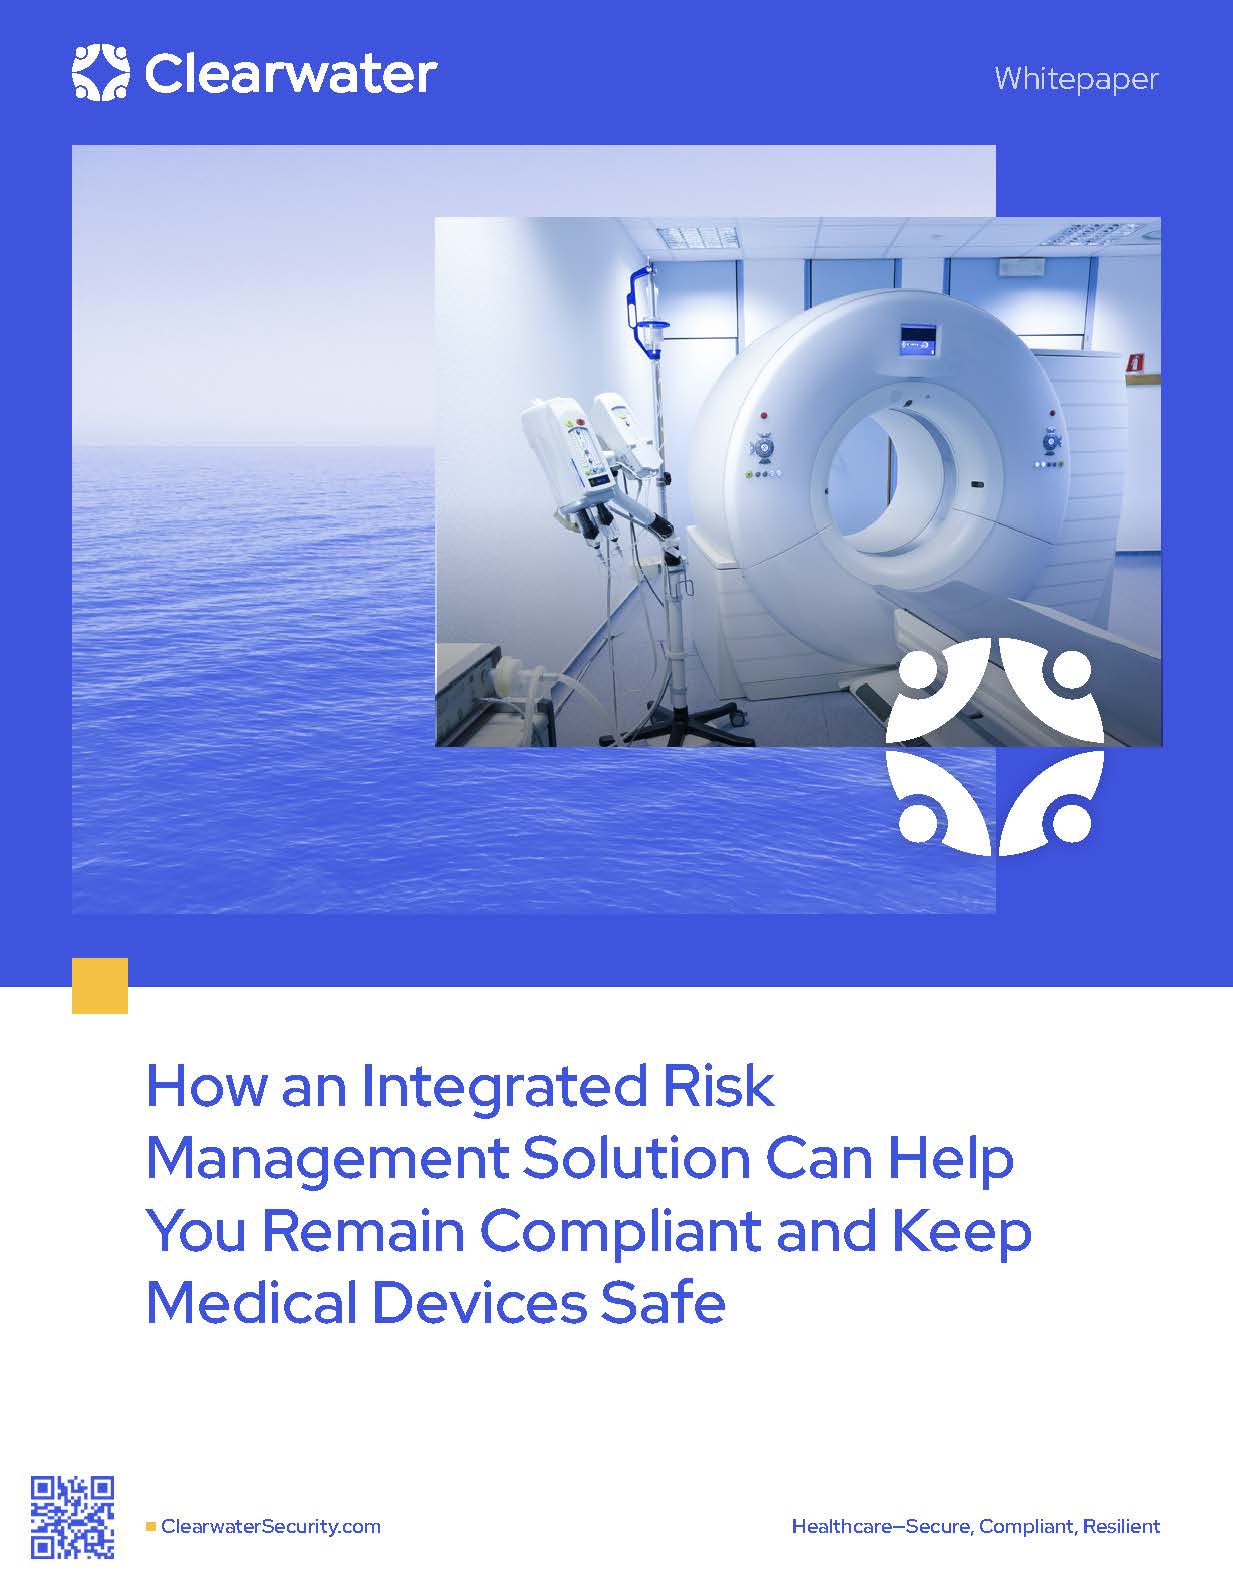 How an Integrated Risk Management Solution Can Help You Remain Compliant and Keep Medical Devices Safe by Clearwater